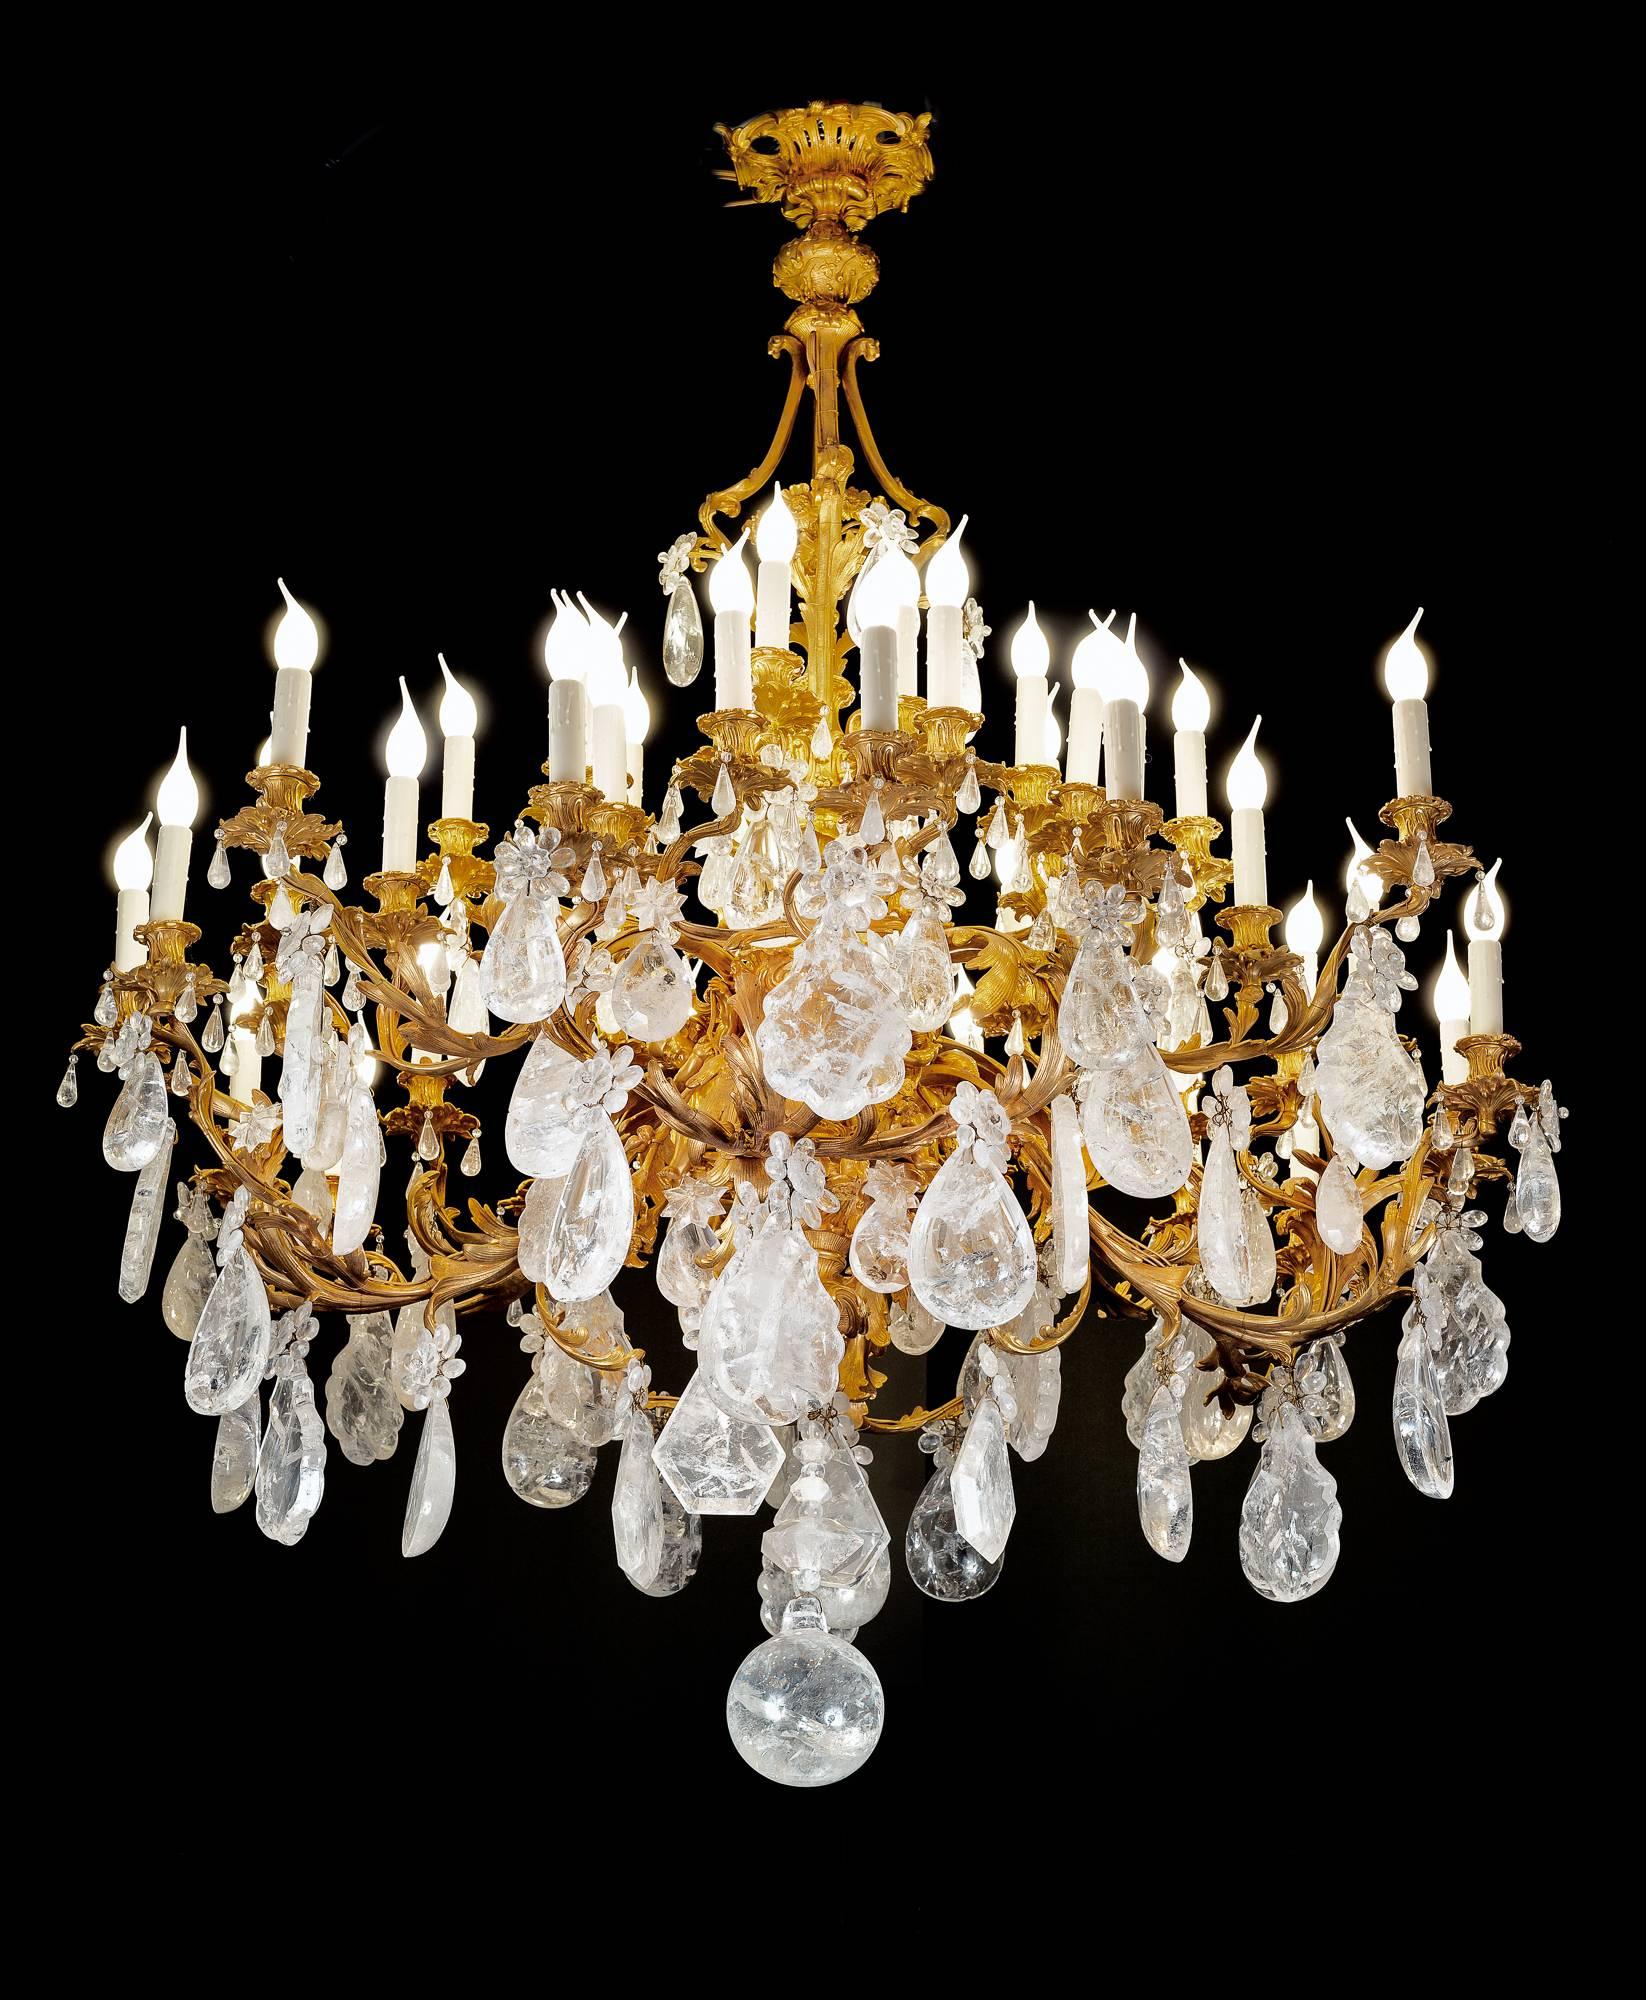 Ormolu bronze chandelier in style of Louis the XVth. 
Modern rock crystal stones specially carved for this model.
48 lights.
 Unique.